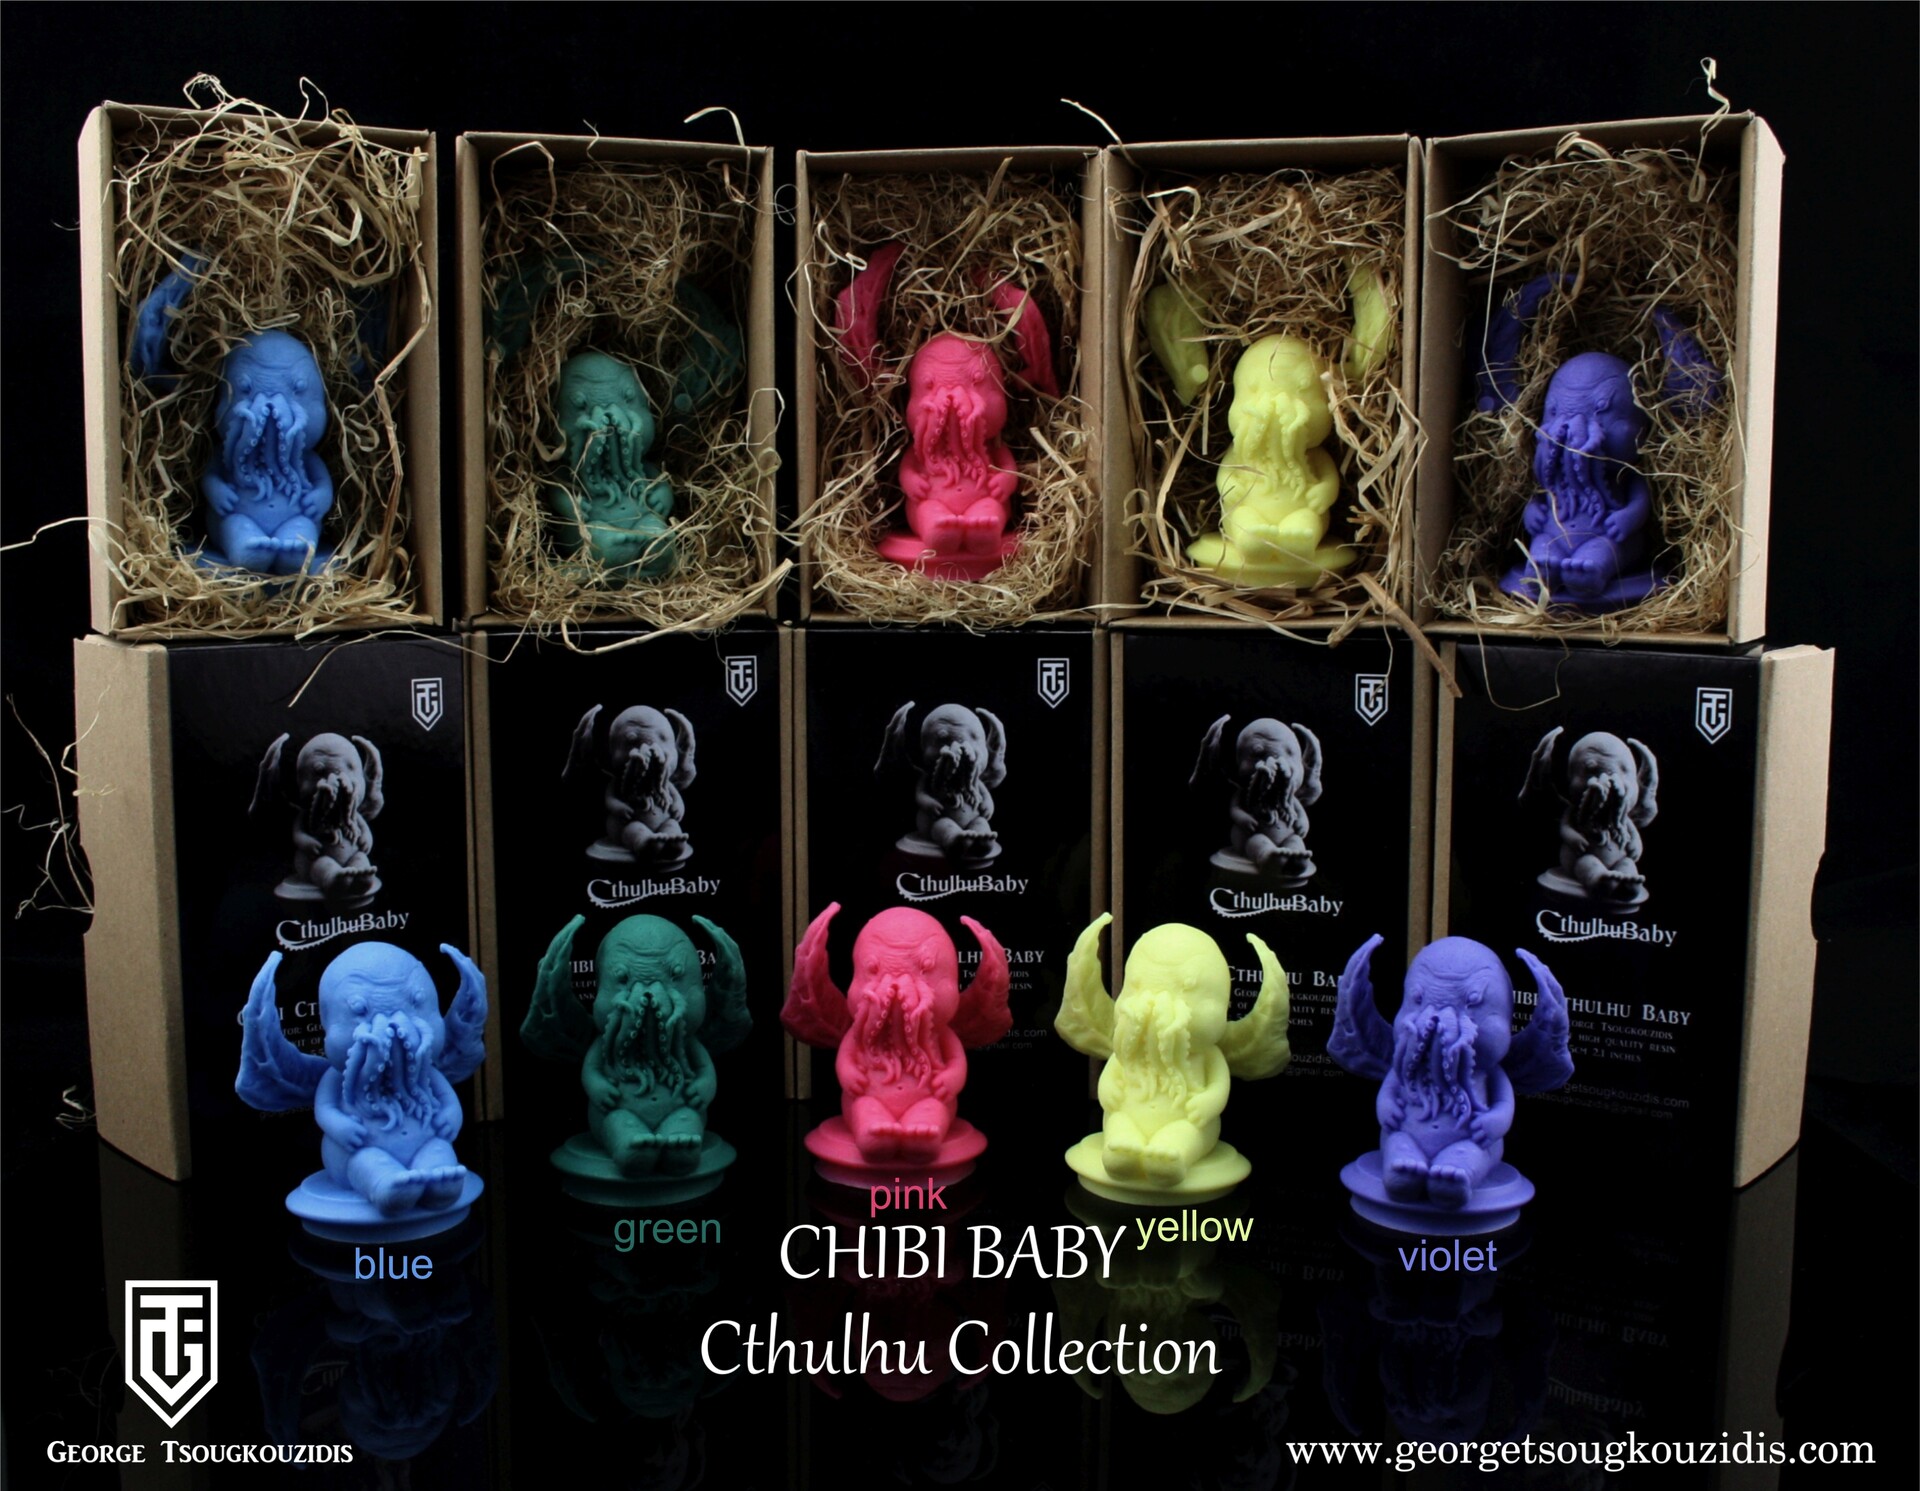 Chibi Cthulhu babies this time 5 color versions sculpted with monster clay ...